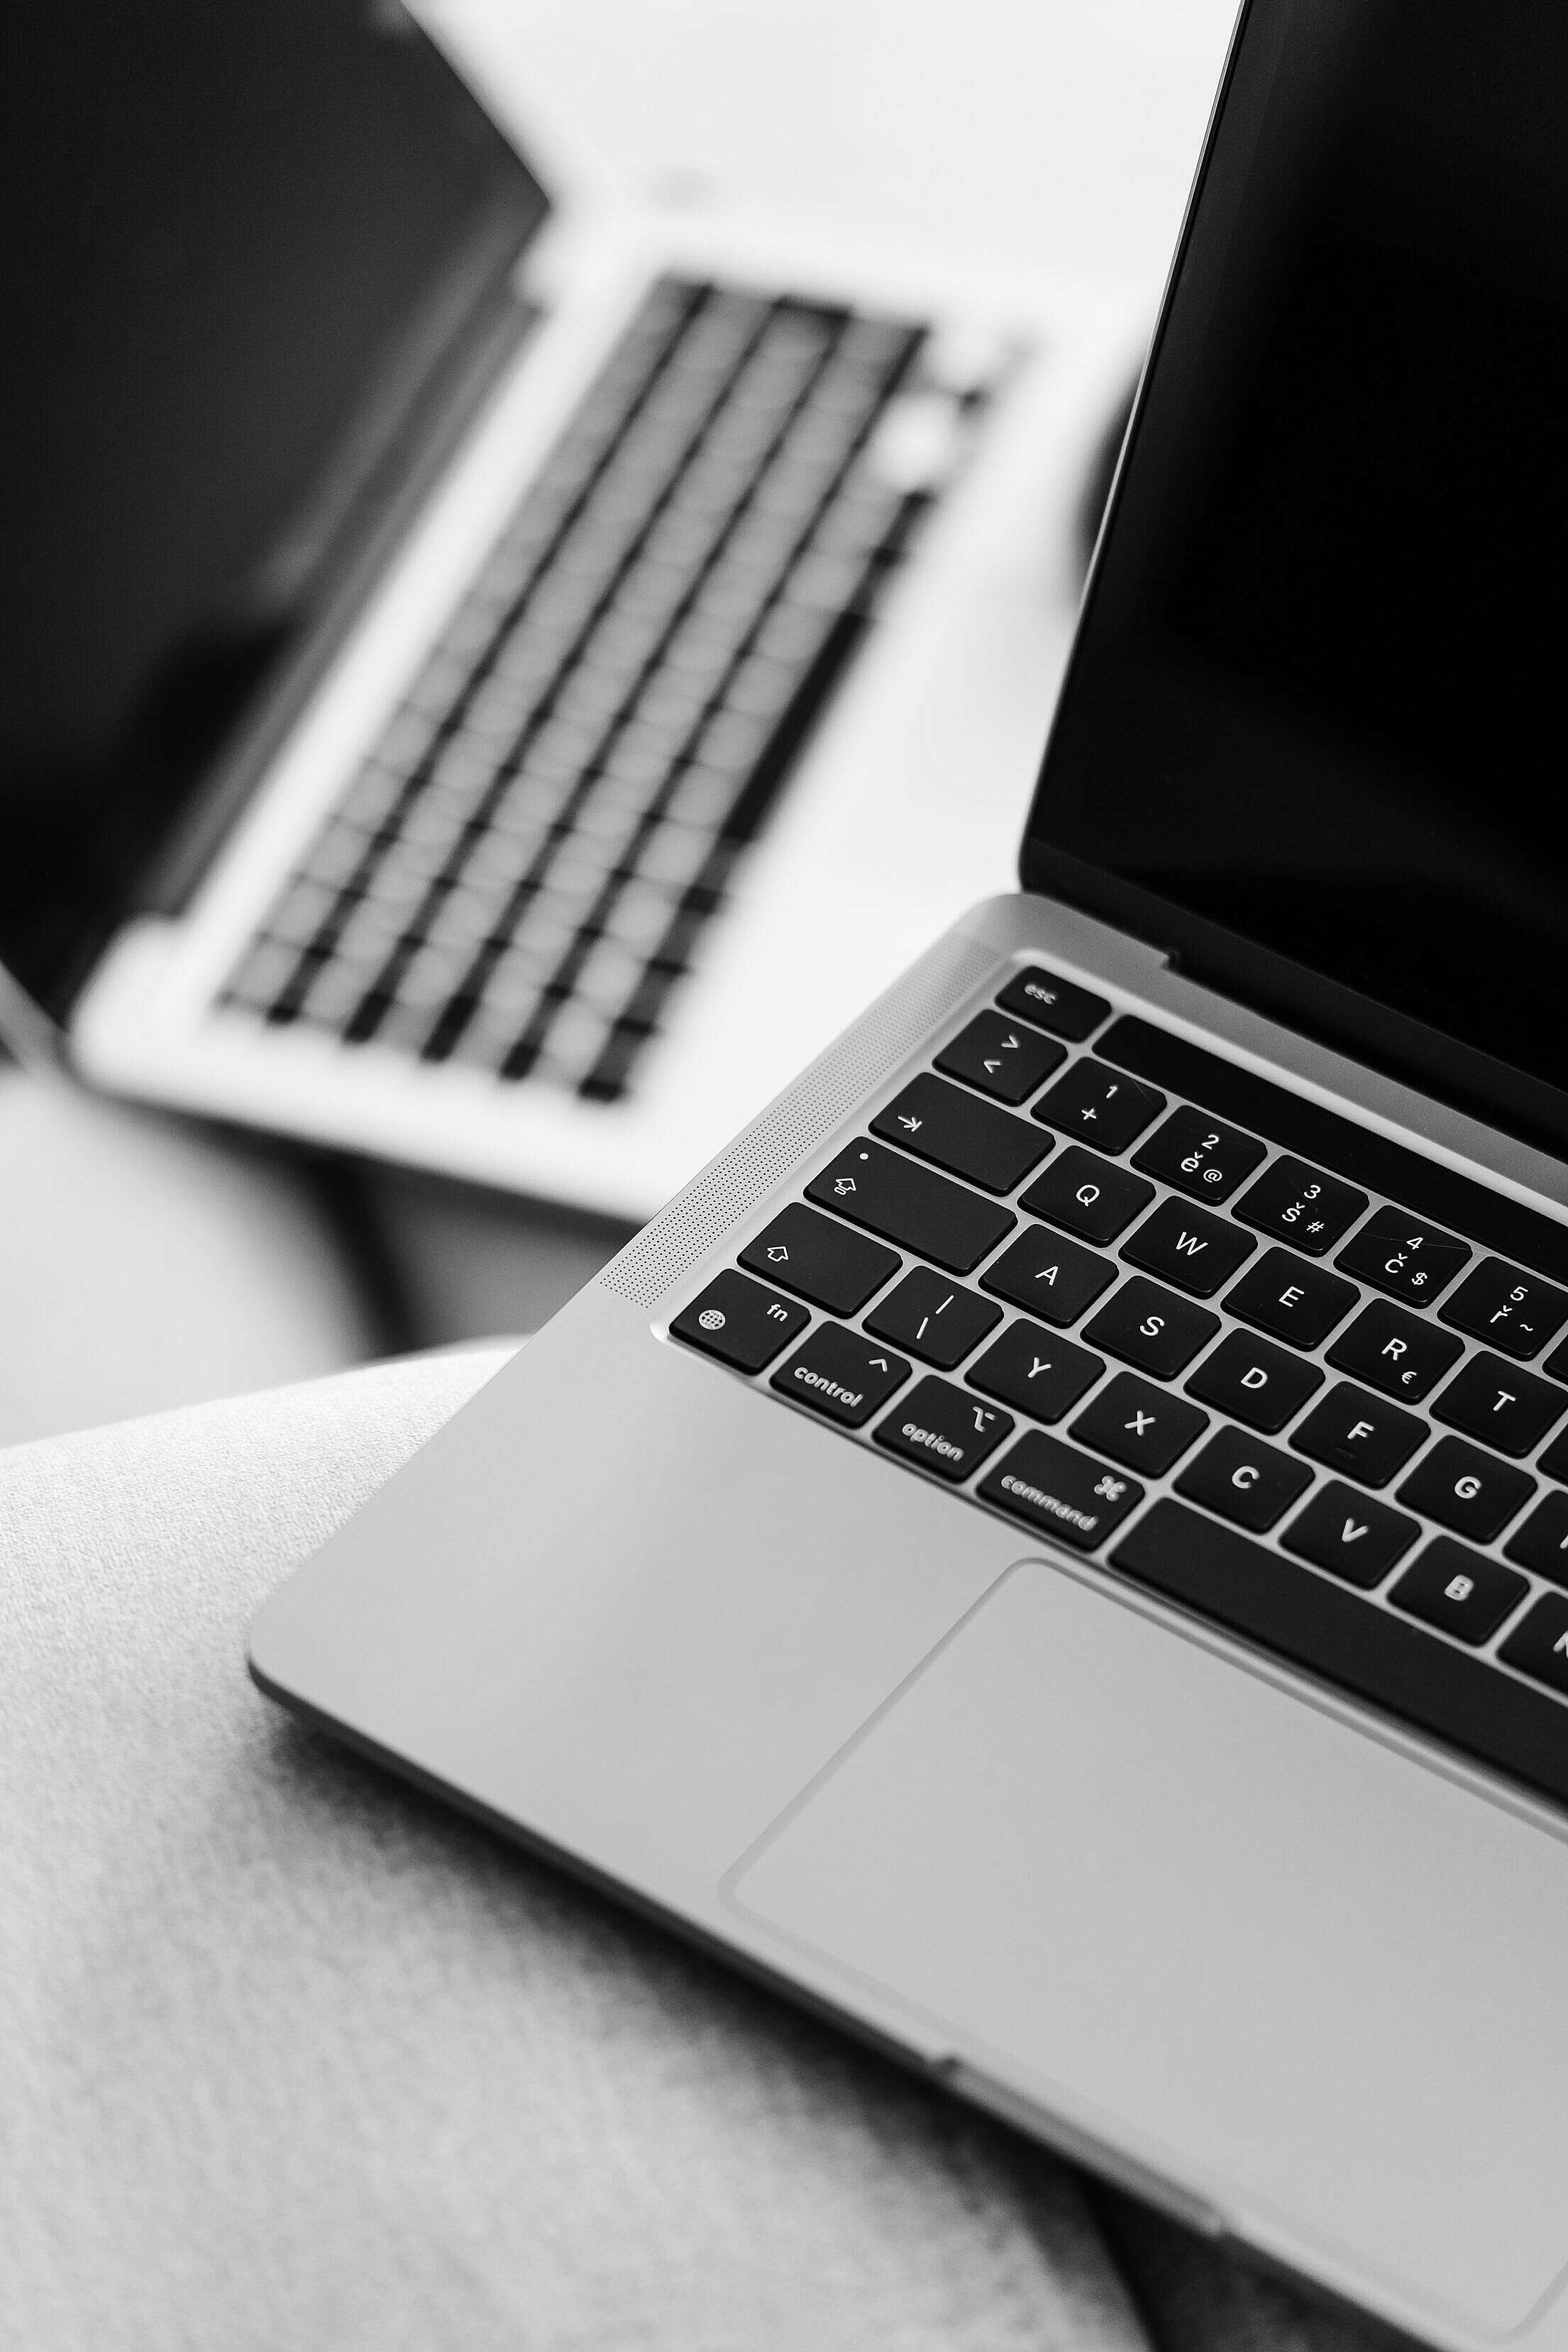 Two MacBook Pro Laptops Black and White Free Stock Photo